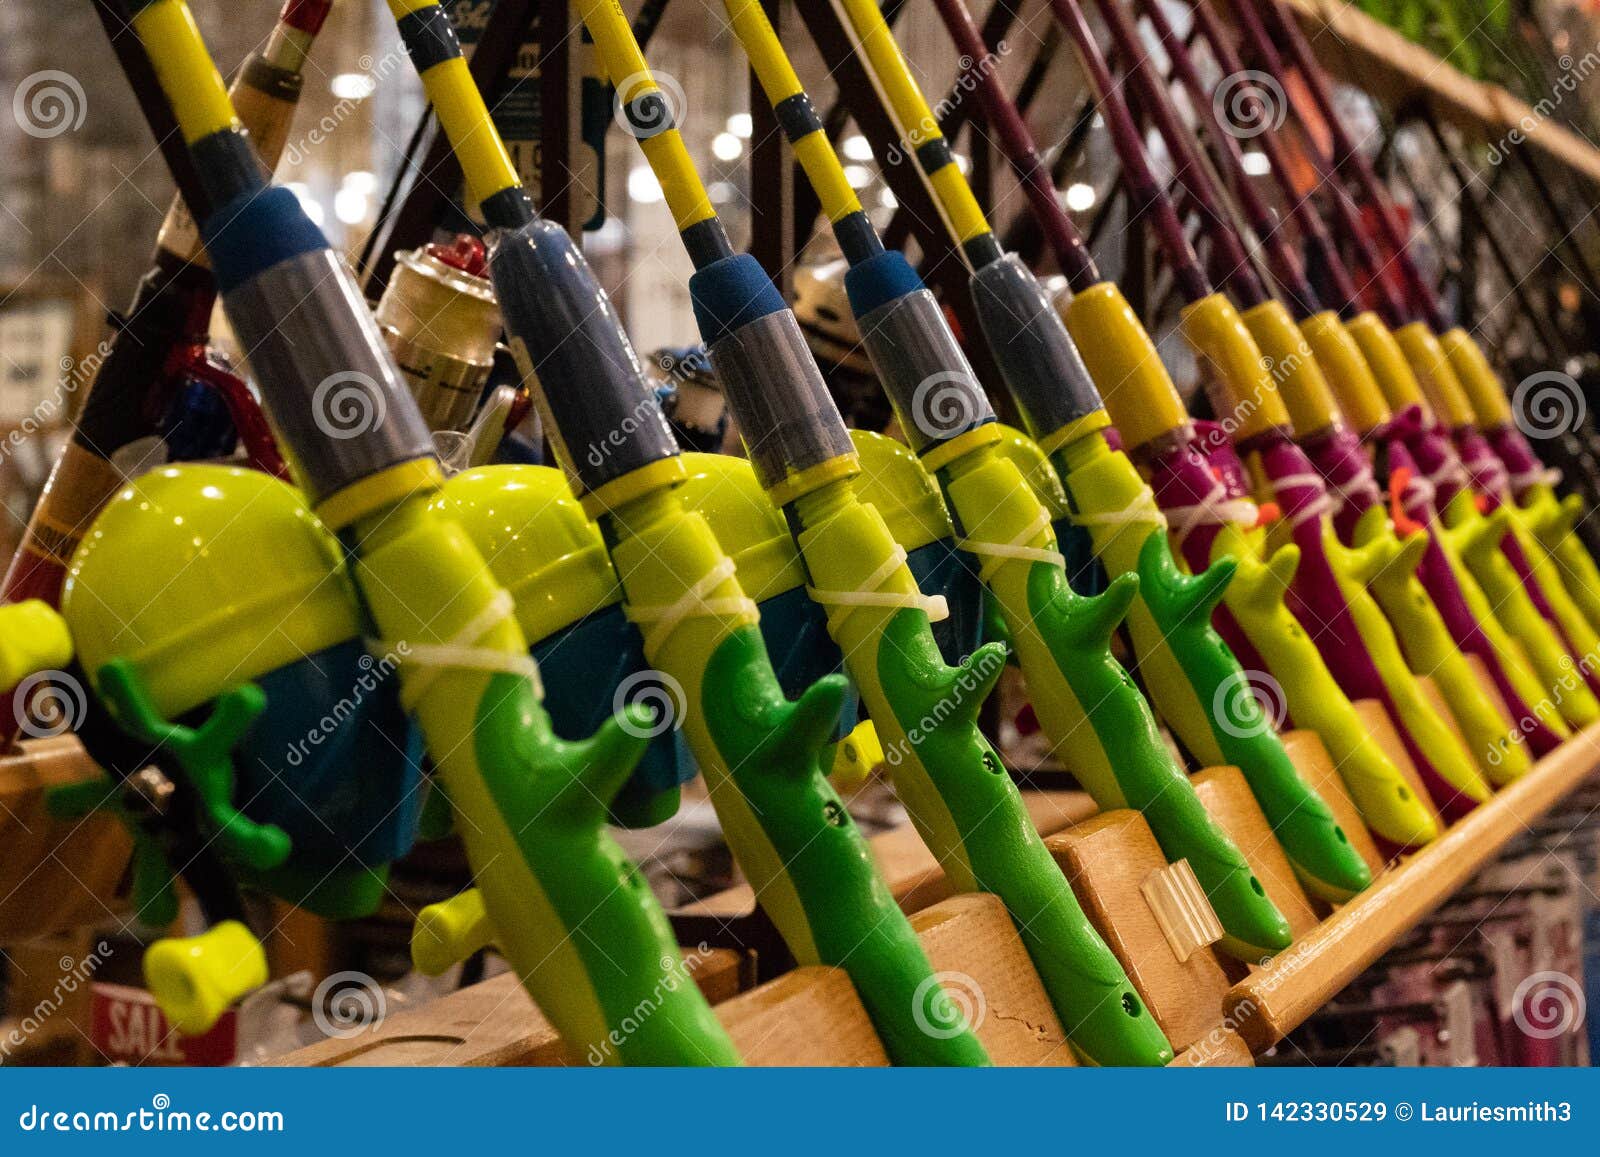 https://thumbs.dreamstime.com/z/brightly-coloured-youth-fishing-poles-displayed-sale-world-renowned-outdoor-sporting-goods-retailer-bright-colors-blue-142330529.jpg